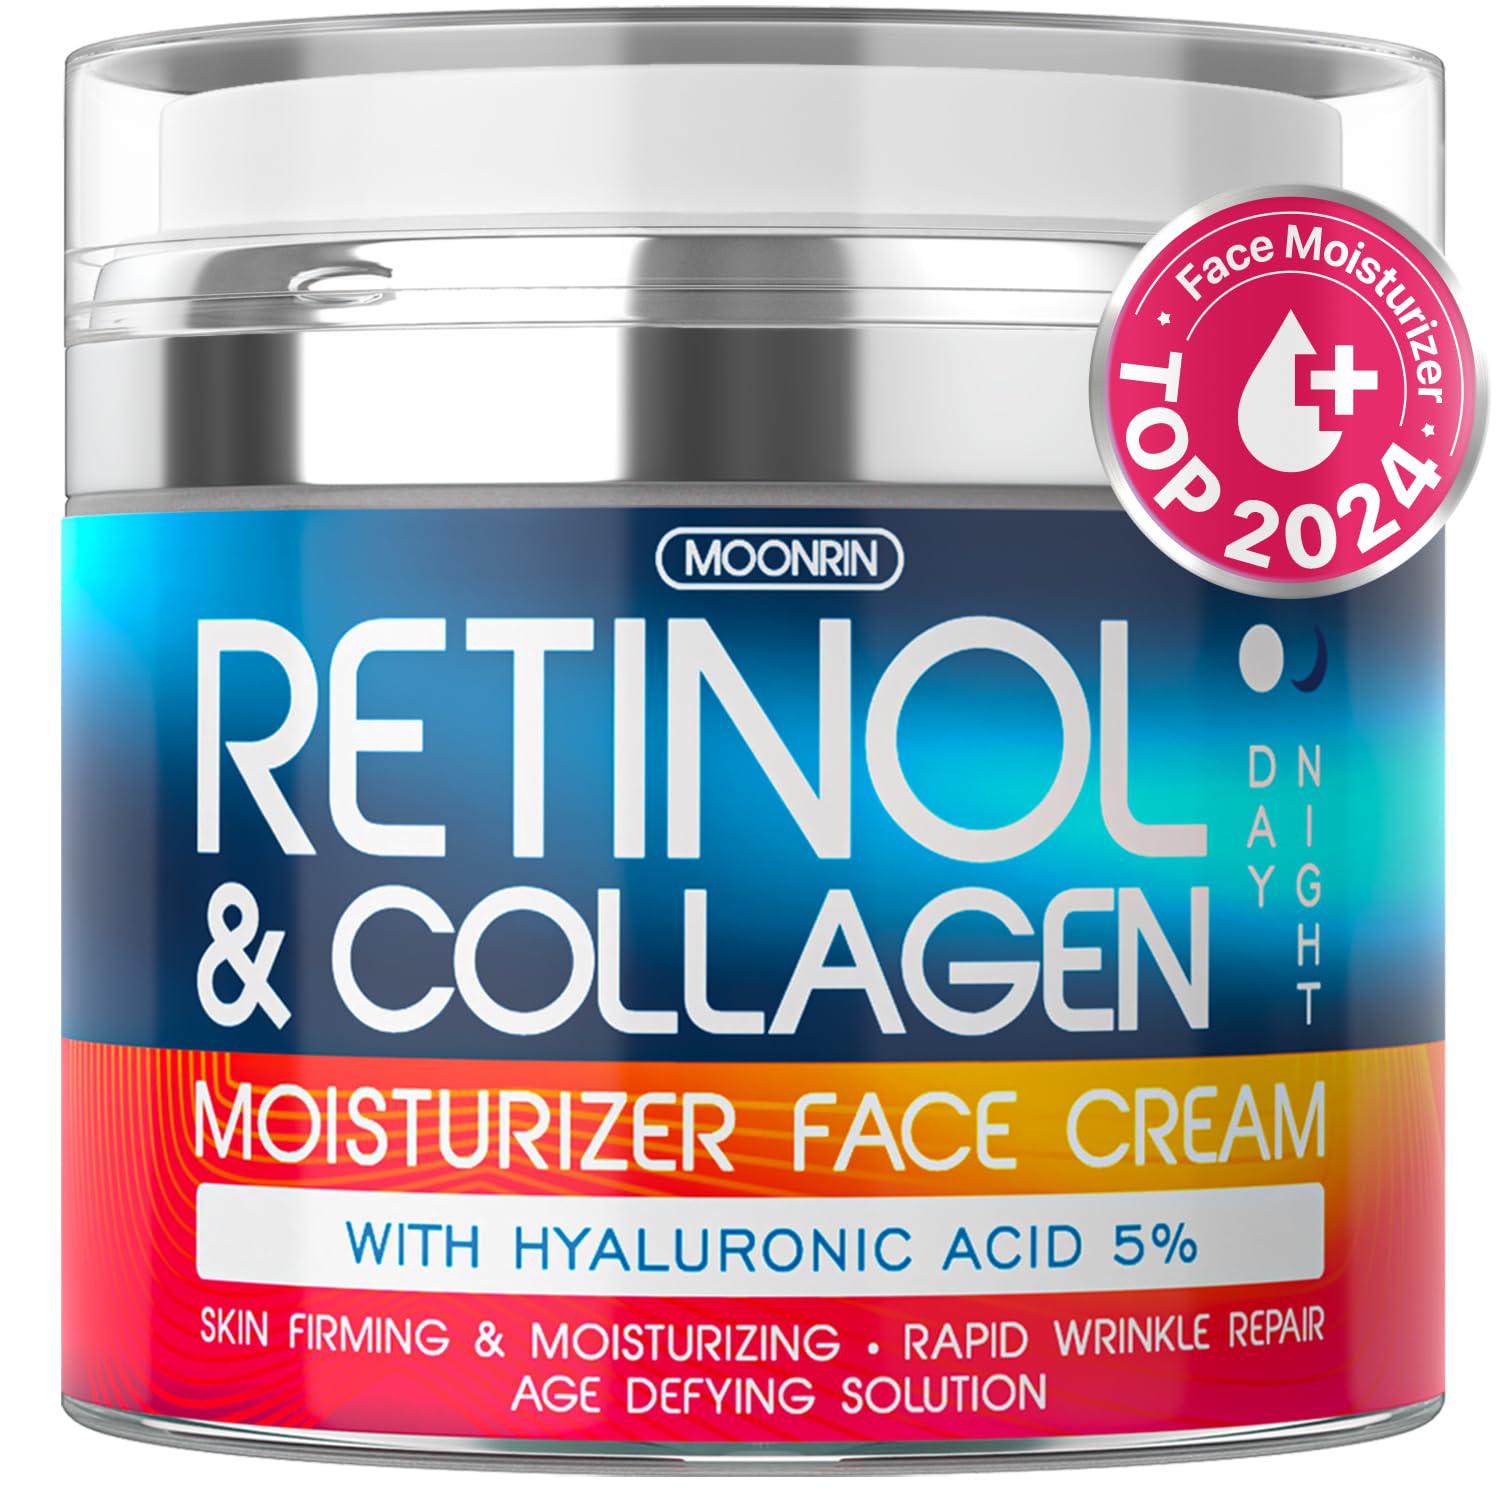 Retinol Cream for Face - Collagen and Retinol Moisturizer with Hyaluronic Acid, Day-Night Anti-Aging